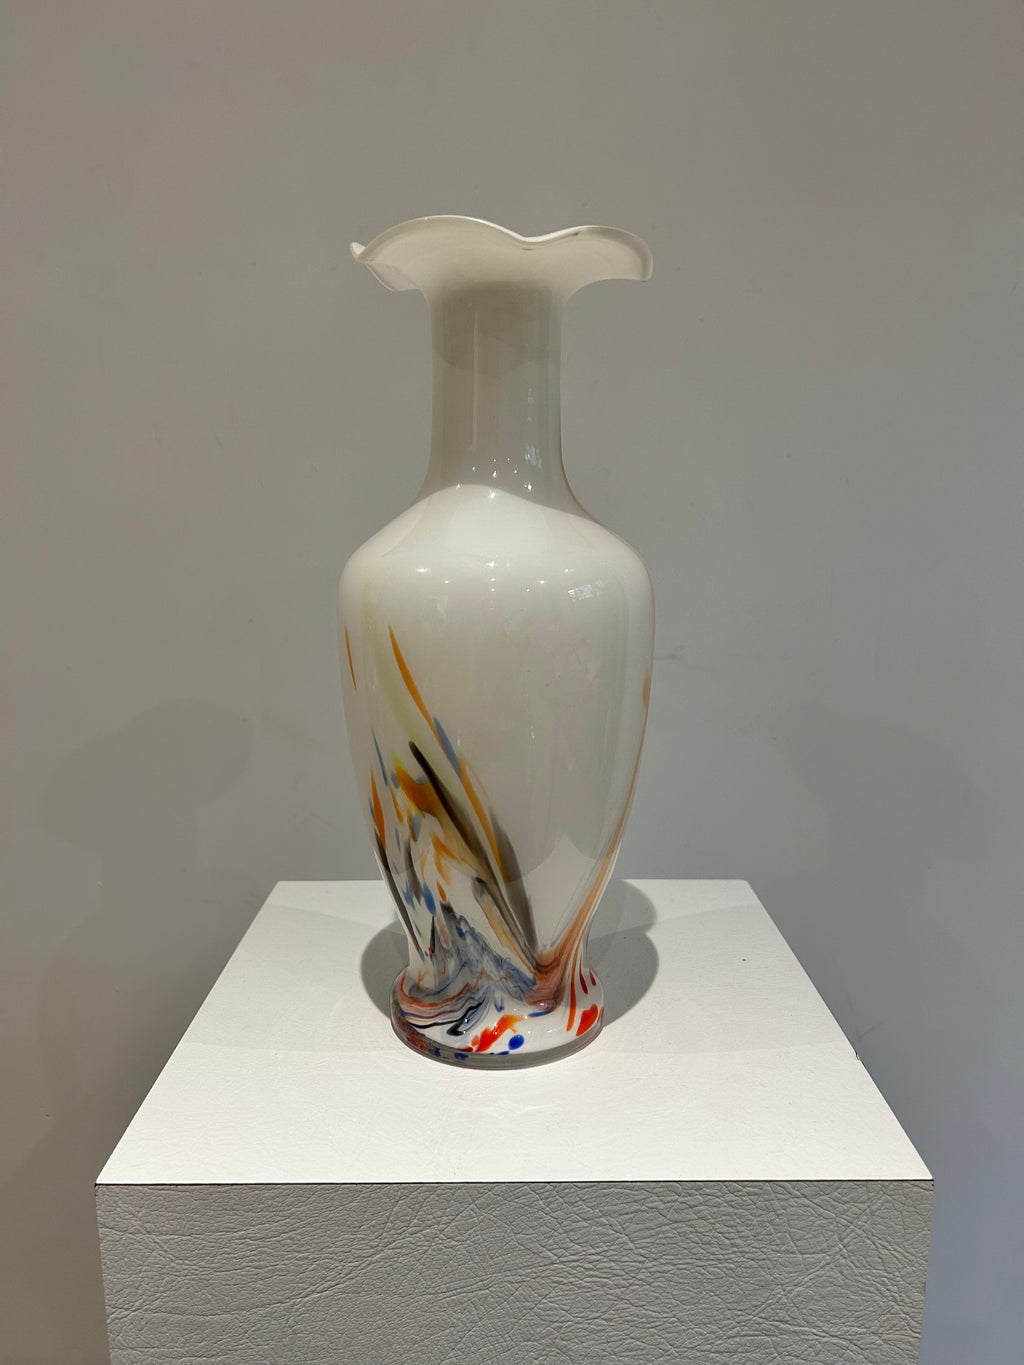 White glass vase with colorful specks